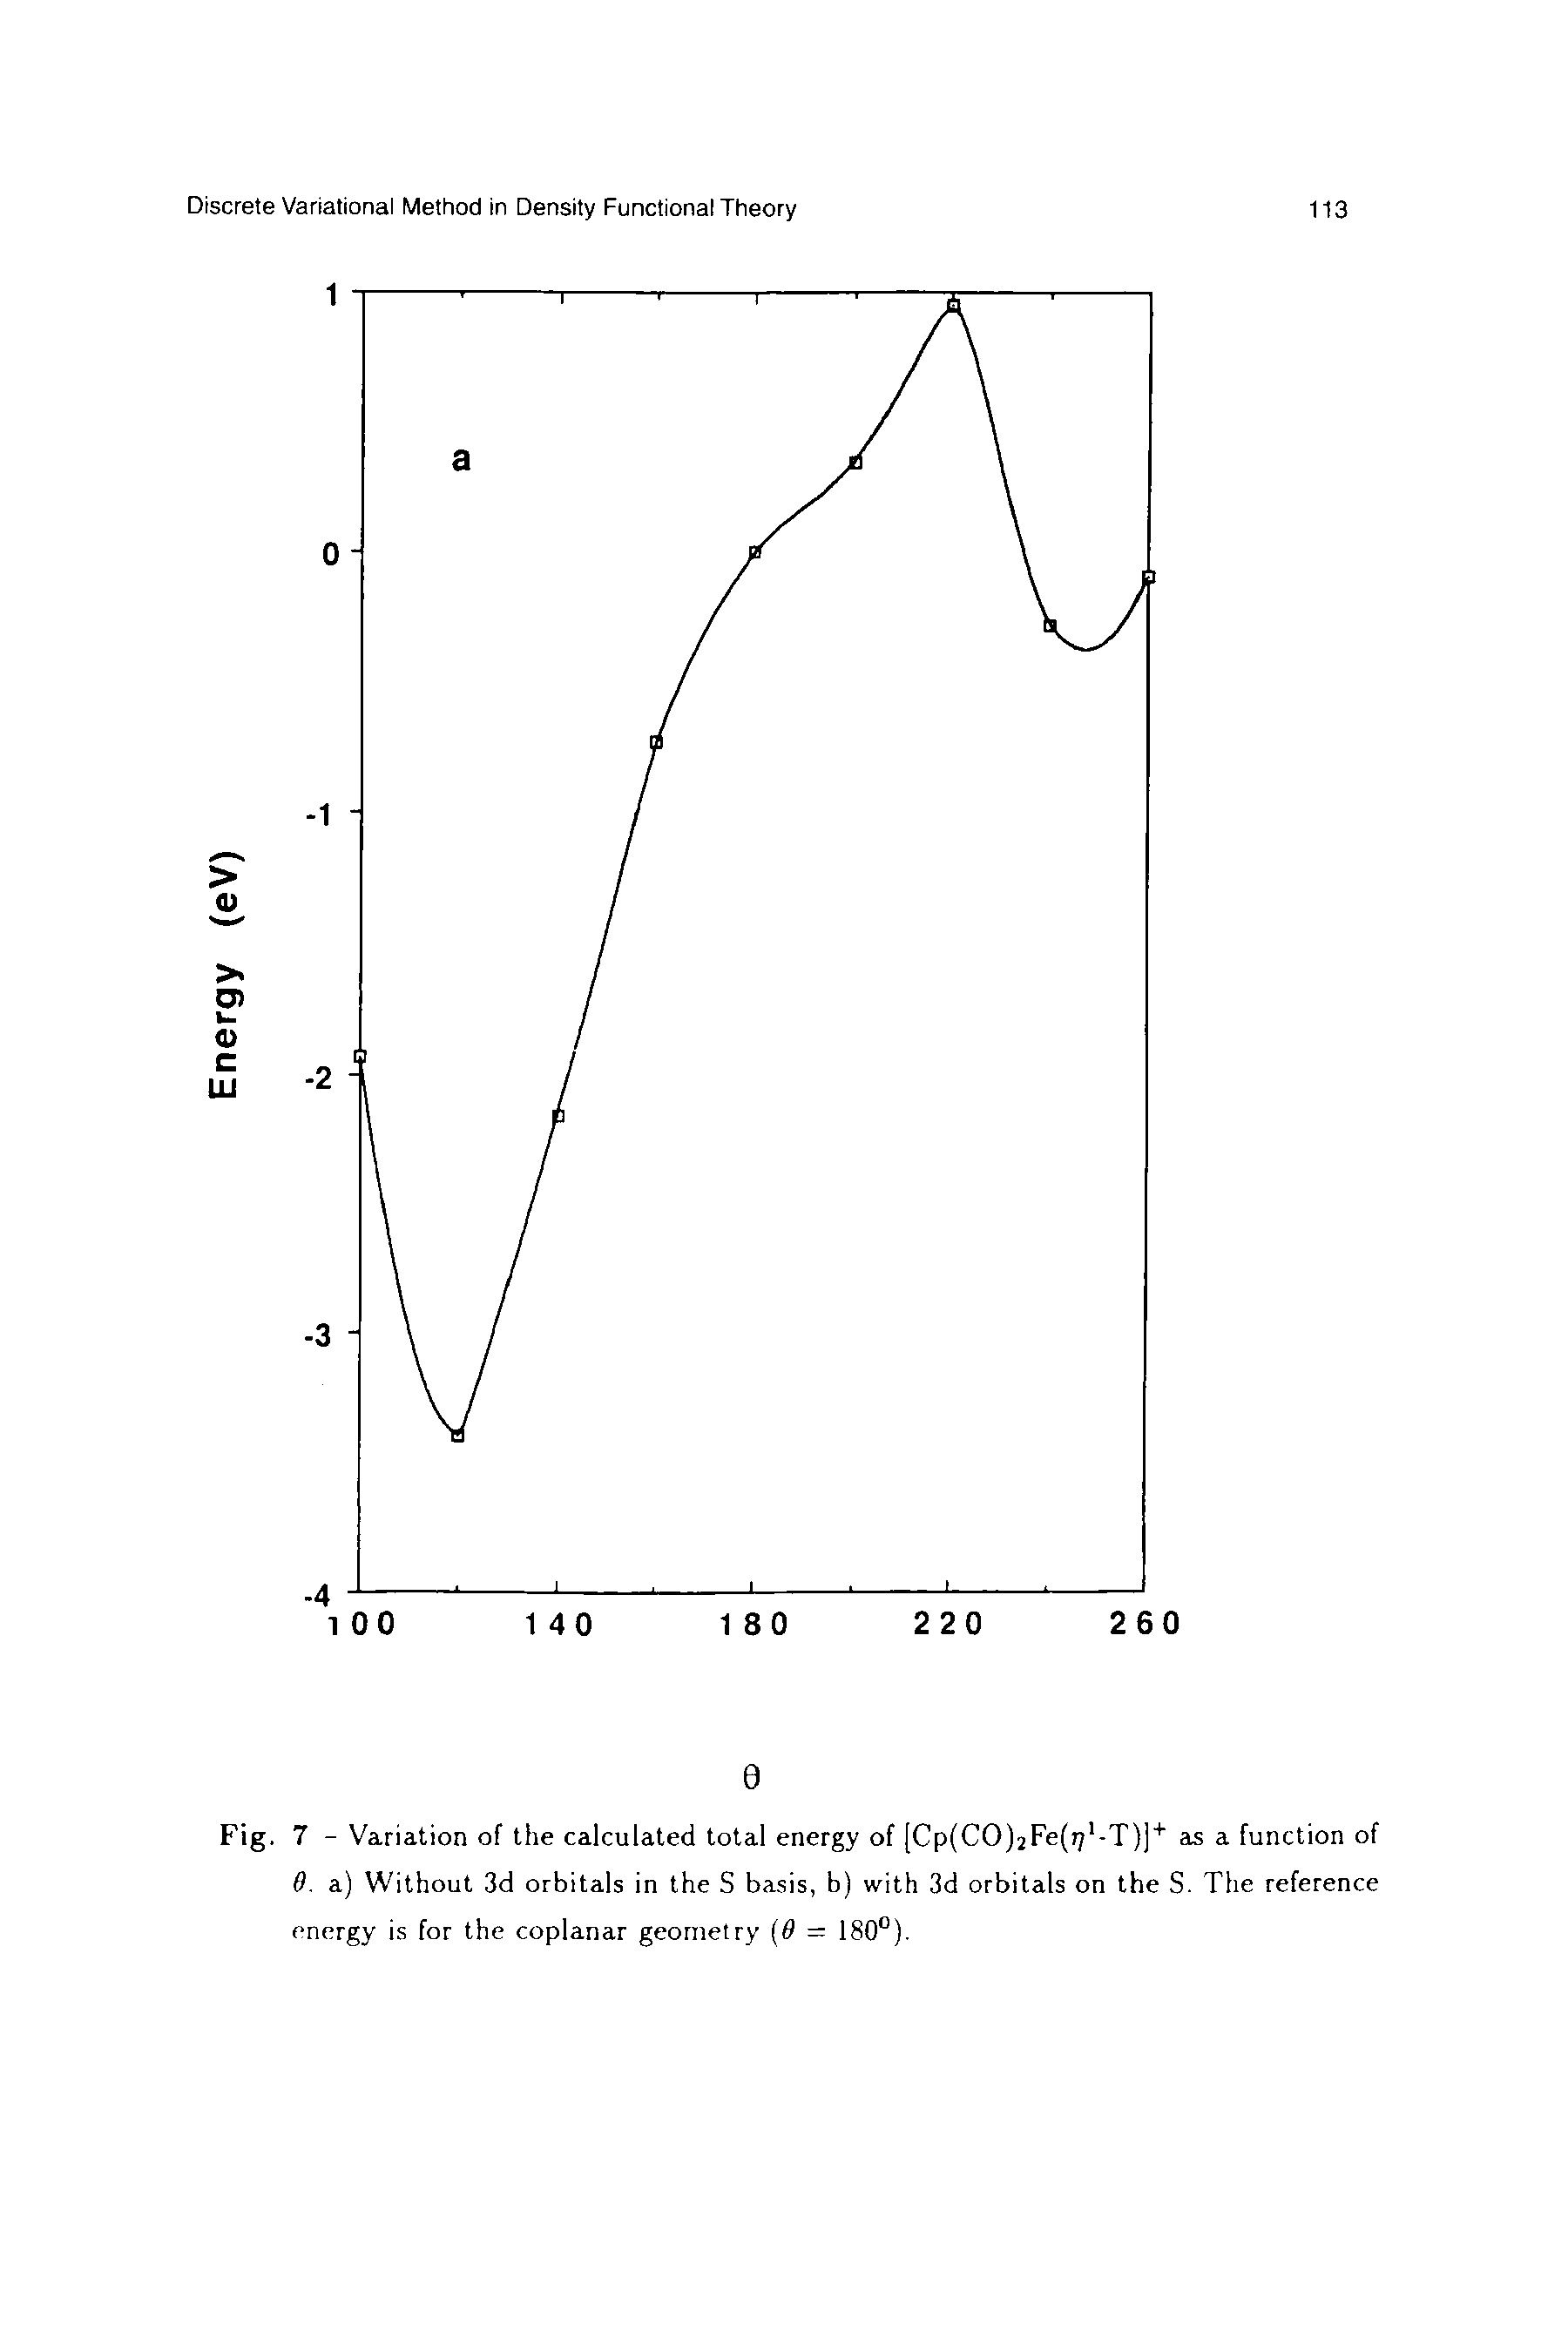 Fig. 7 - Variation of the calculated total energy of [Cp(C0)2Fe(r 1-T)]+ as a function of 0. a) Without 3d orbitals in the S basis, b) with 3d orbitals on the S. The reference energy is for the coplanar geometry (8 = 180°).